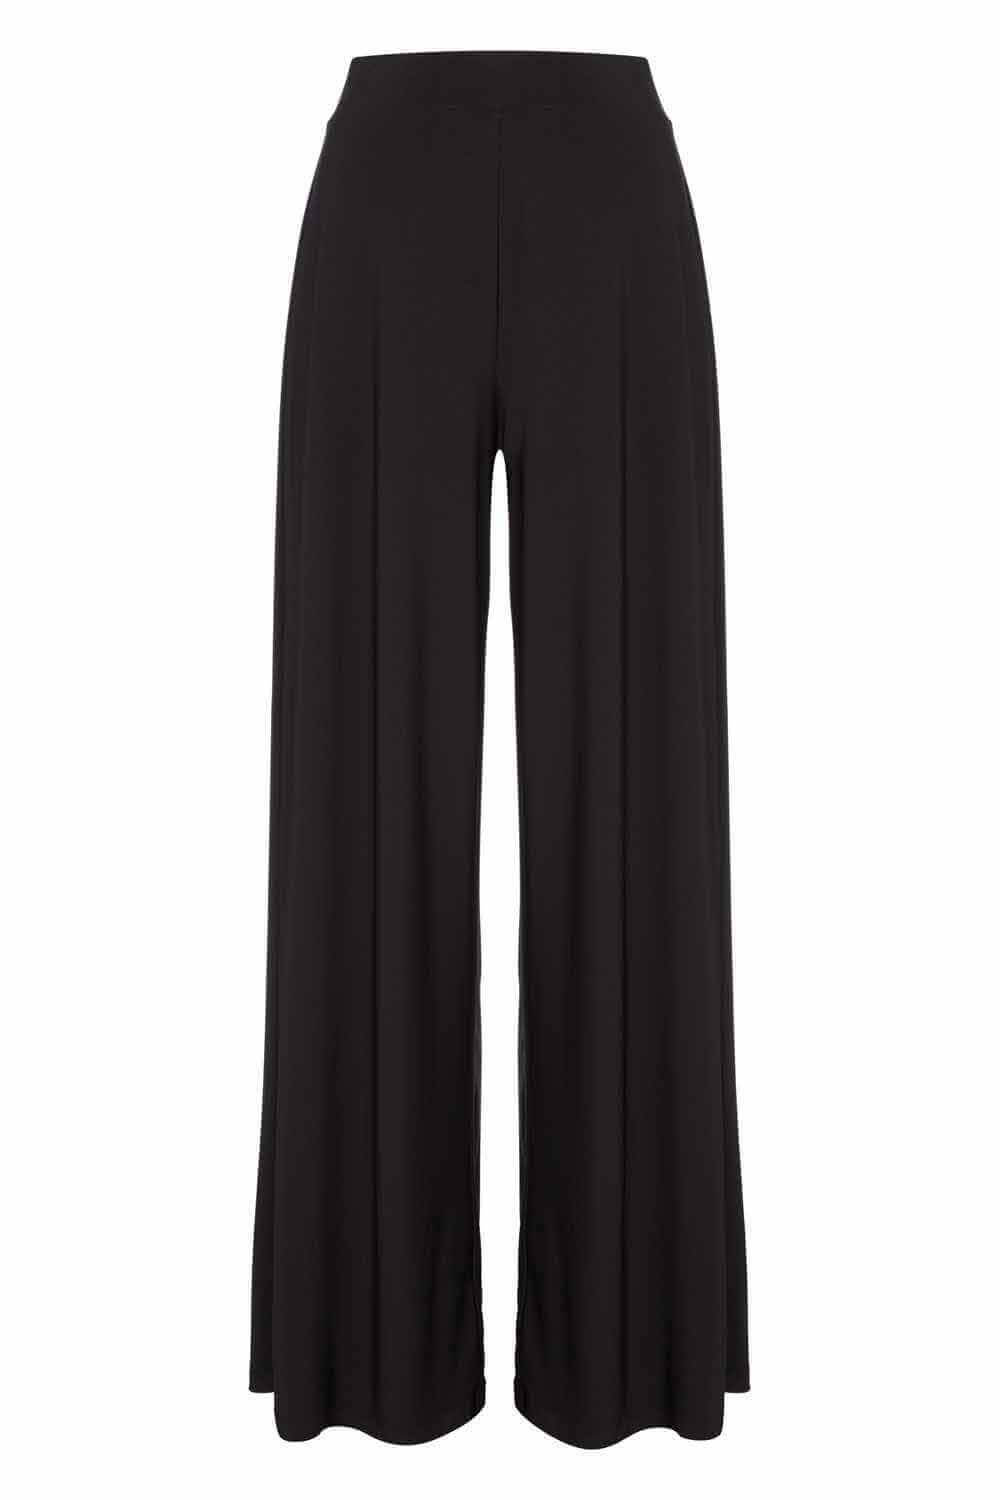 Black Wide Leg Stretch Trousers, Image 6 of 6